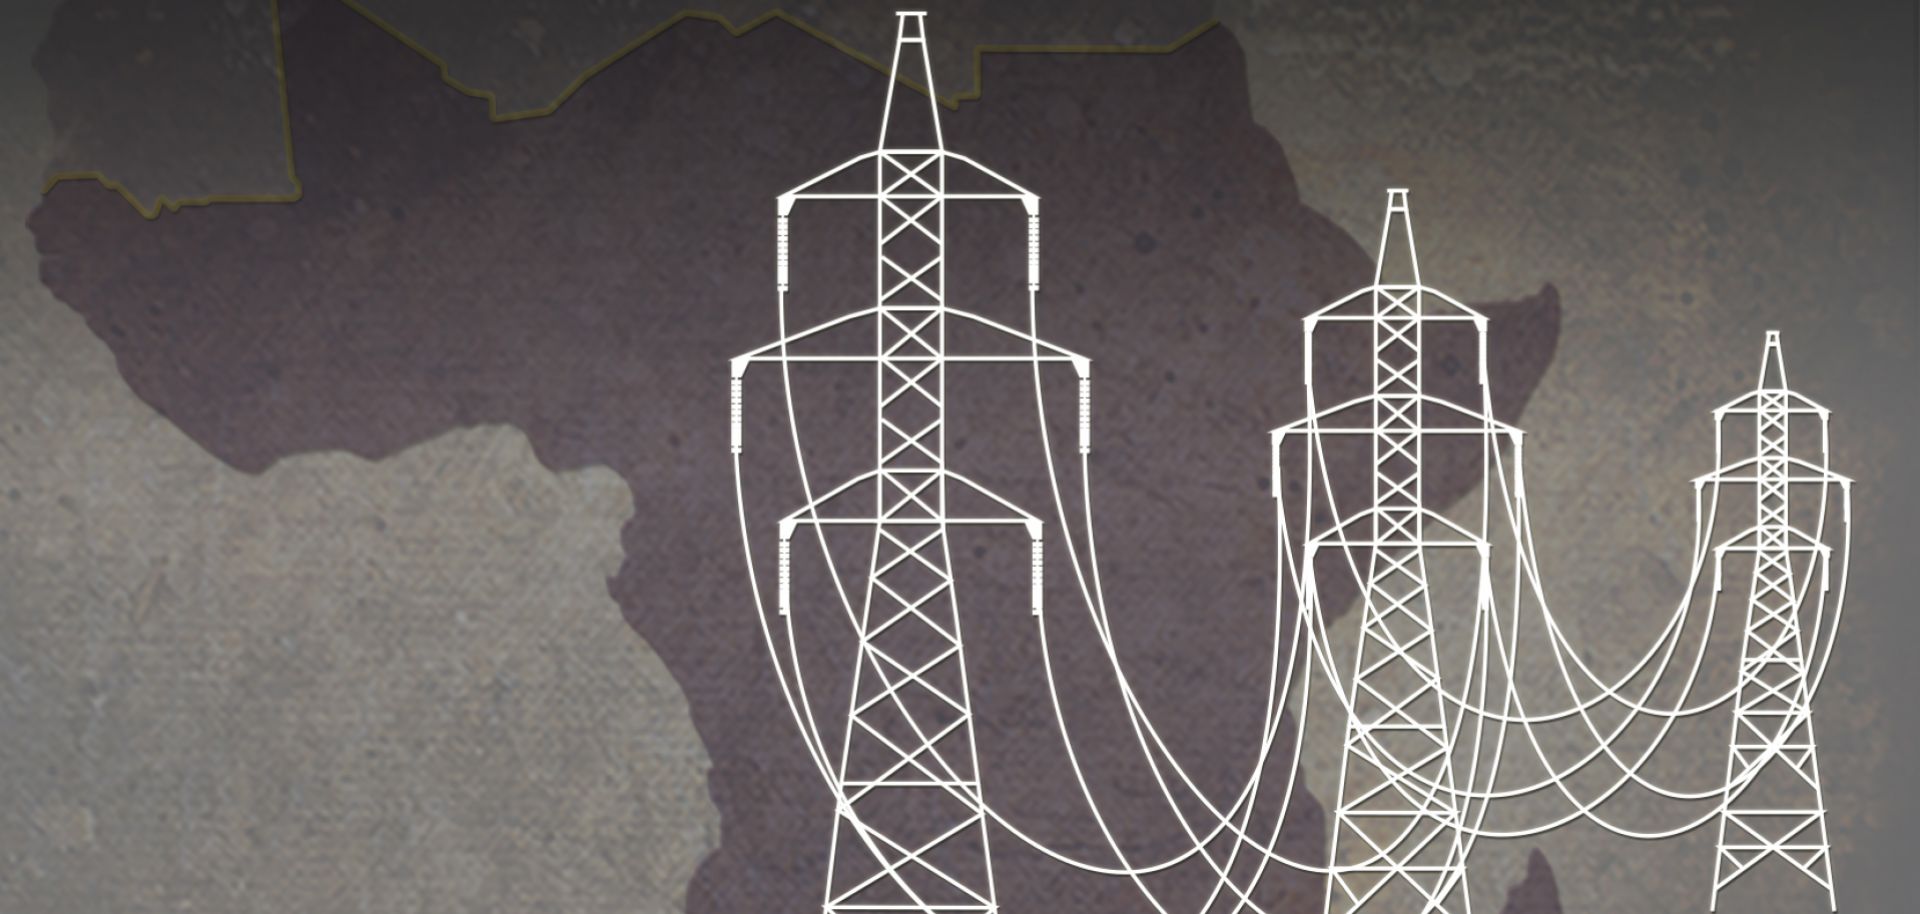 Southern Africa's cluster of power grids is established in regard to transmission and generation infrastructure and the trading mechanisms that help balance localized shortages. South Africa is among the most stable and largest electricity producers in sub-Saharan Africa. Power grids in Southern Africa developed in large part due to the early influence of demands from the power-intensive copper mining industry in the Democratic Republic of the Congo and in Zambia.